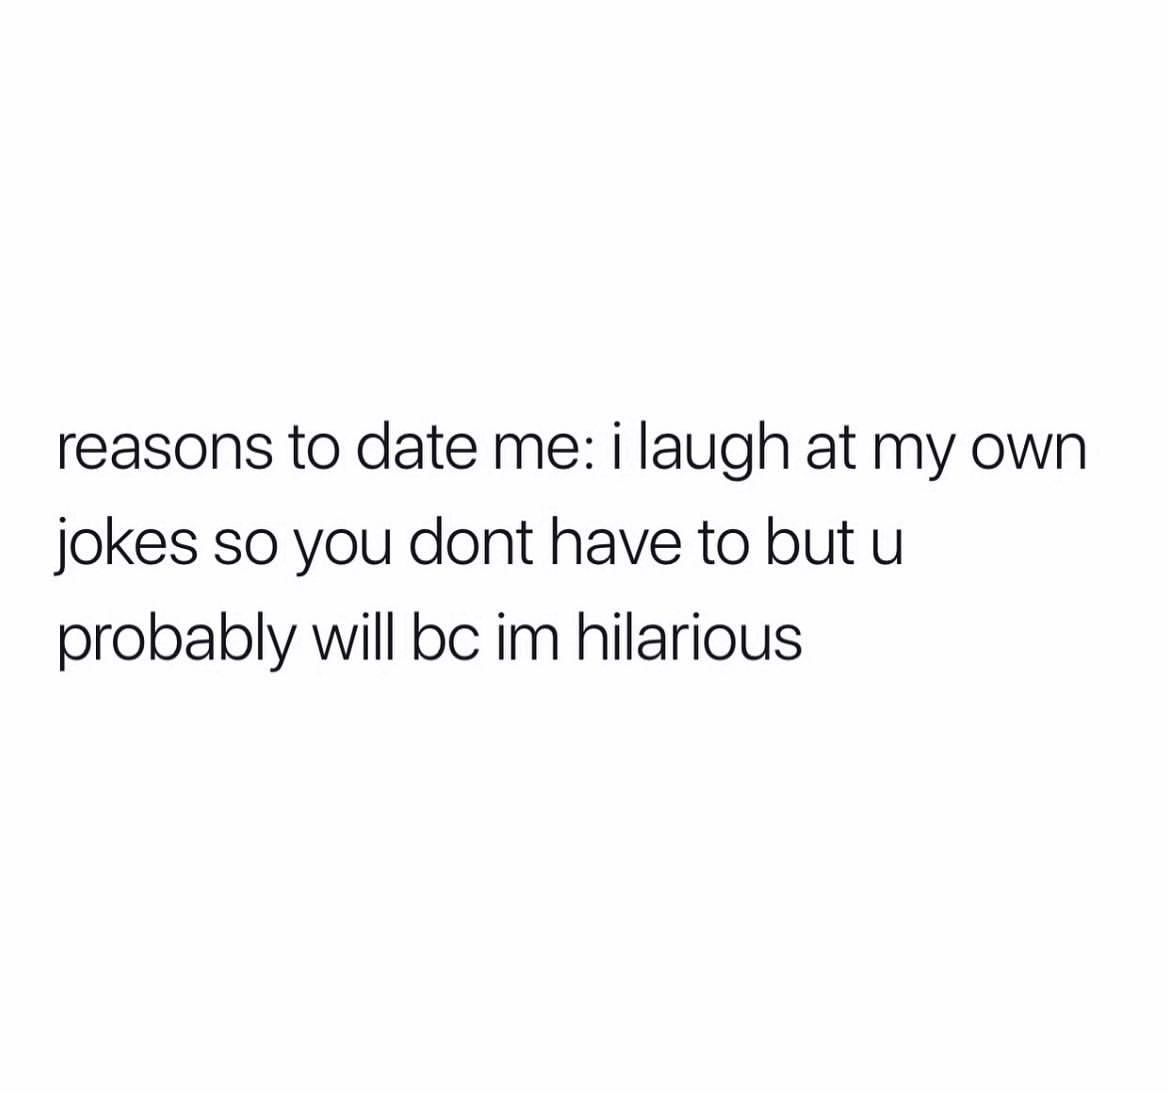 Reasons to date me: I laugh at my own jokes so you don't have to but u probably will bc Im hilarious.